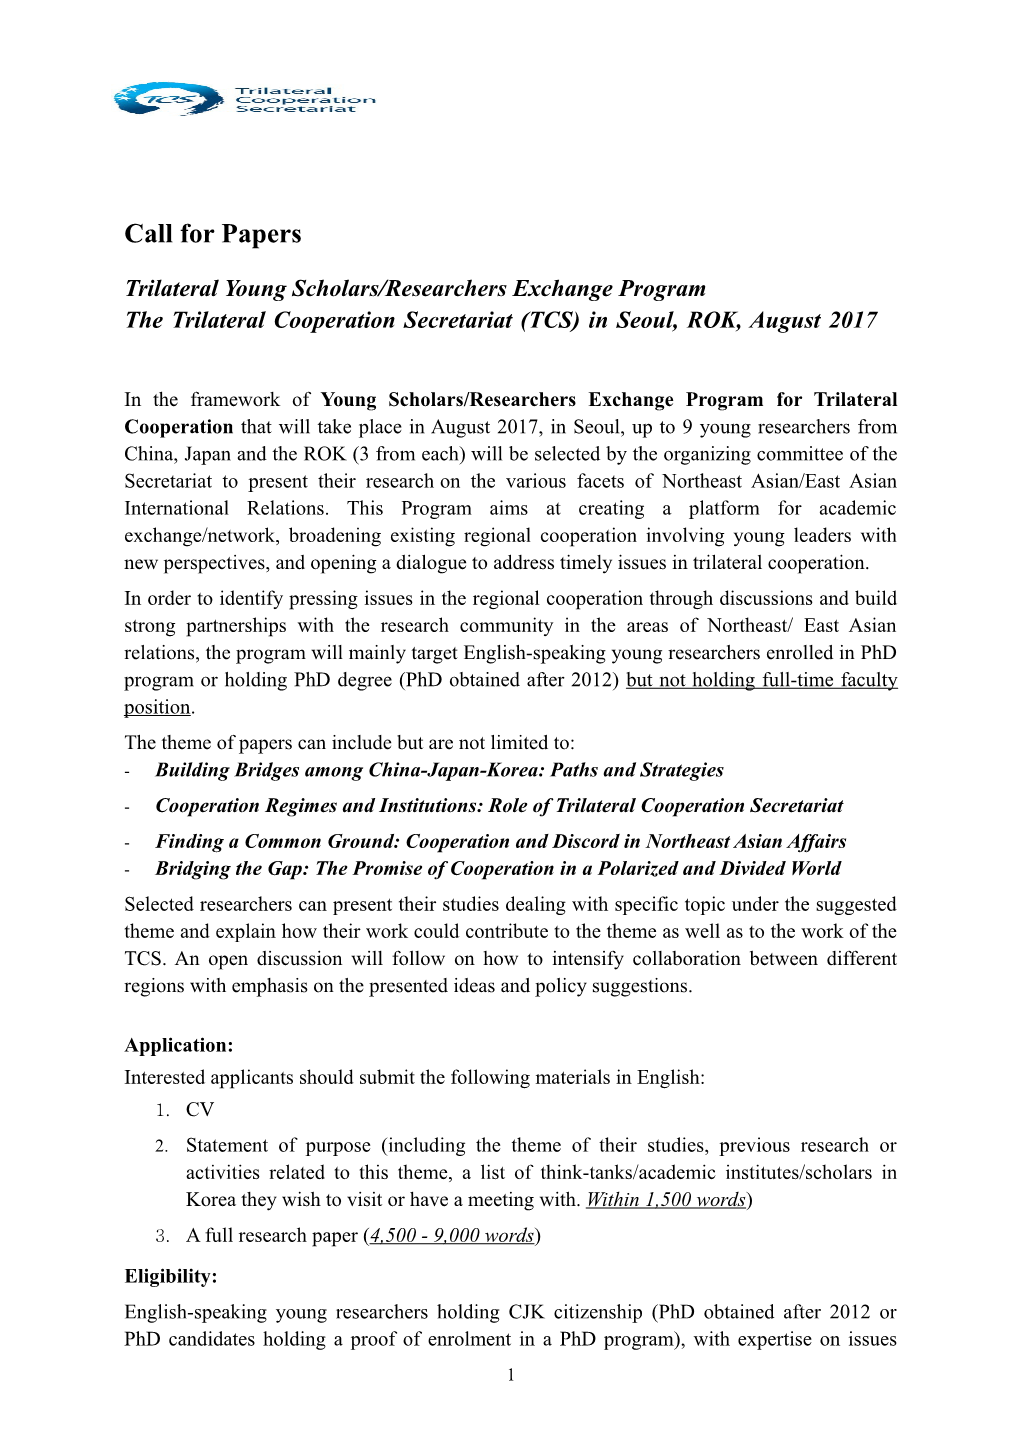 Trilateral Young Scholars/Researchers Exchange Program